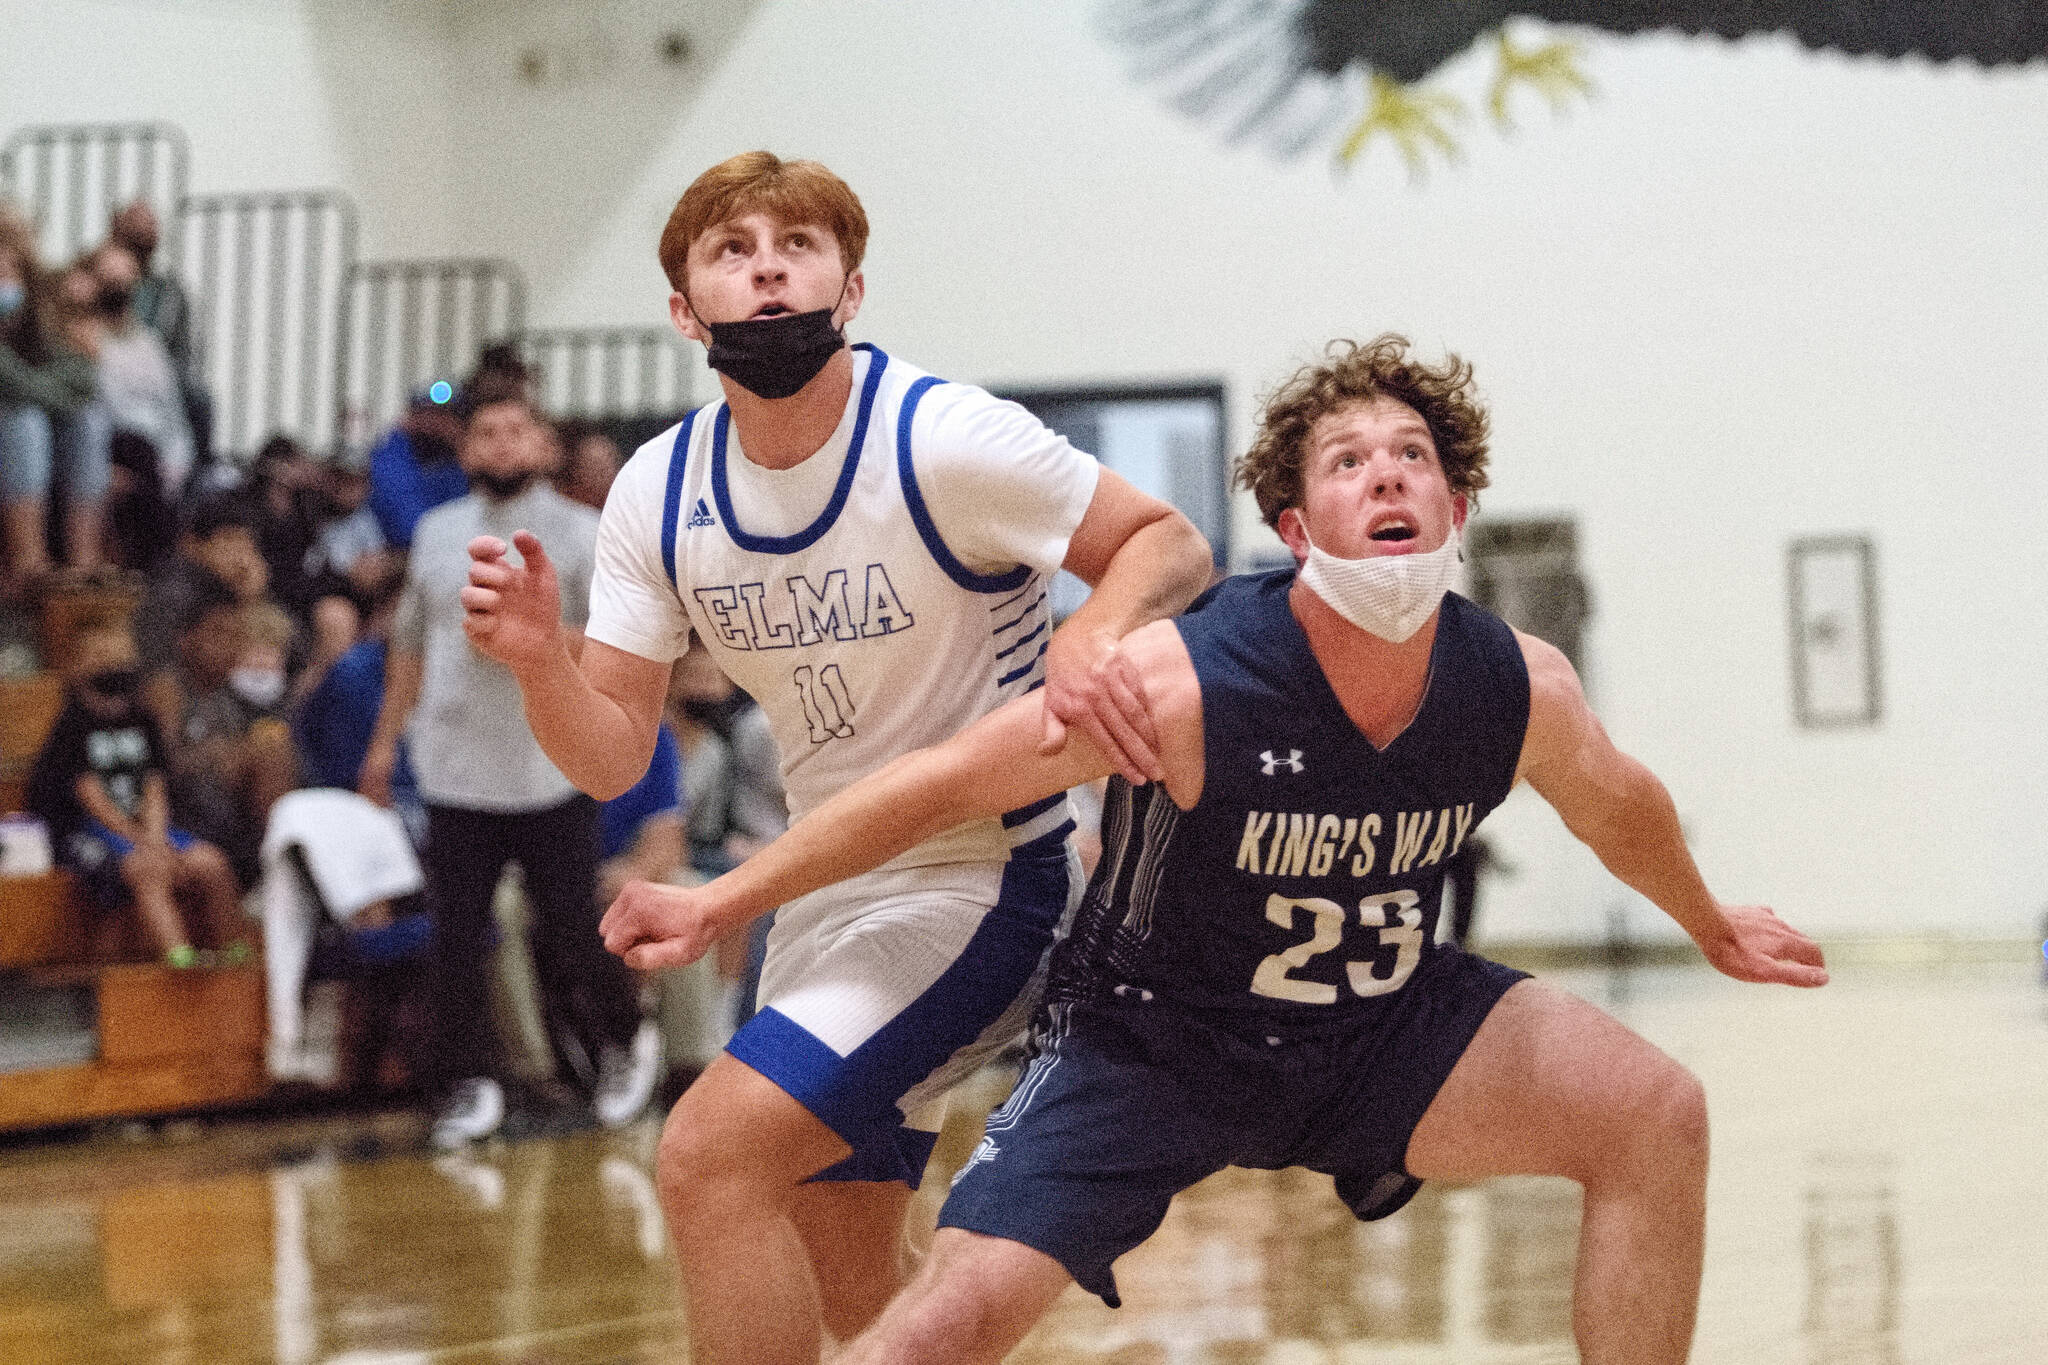 DAILY WORLD FILE PHOTO Elma’s Nick Church (11) helped the Eagles reach the 1A District 4 championship game against King’s Way Christian in June. It was the first time Elma reached the district-title game since 2001.